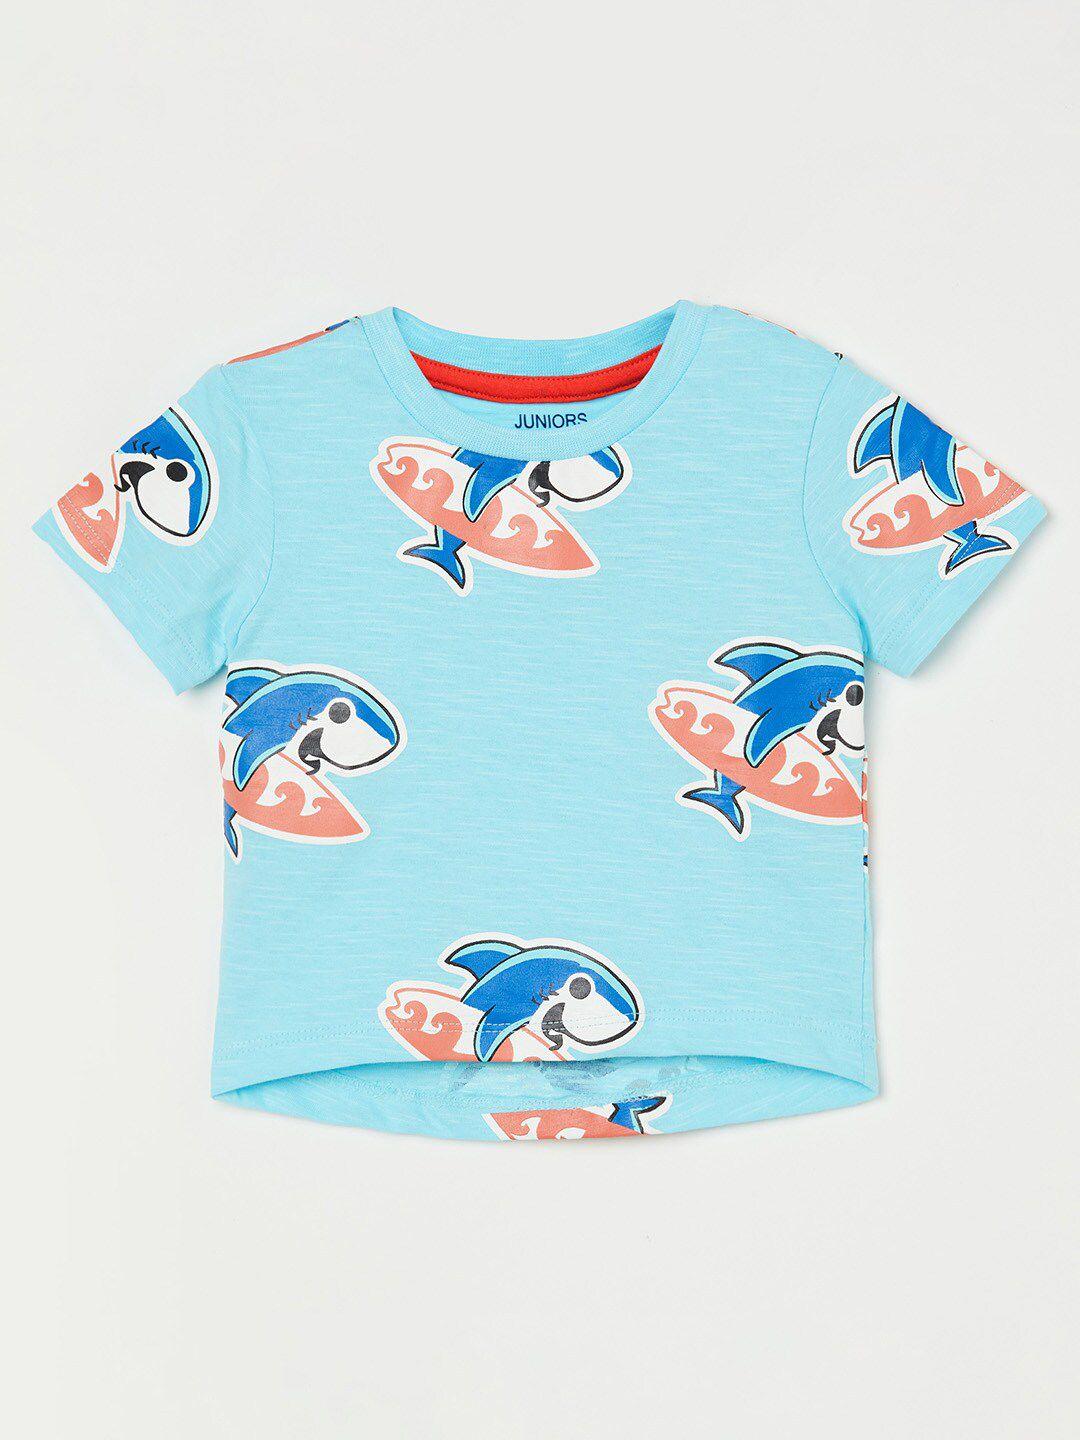 juniors by lifestyle boys printed cotton t-shirt